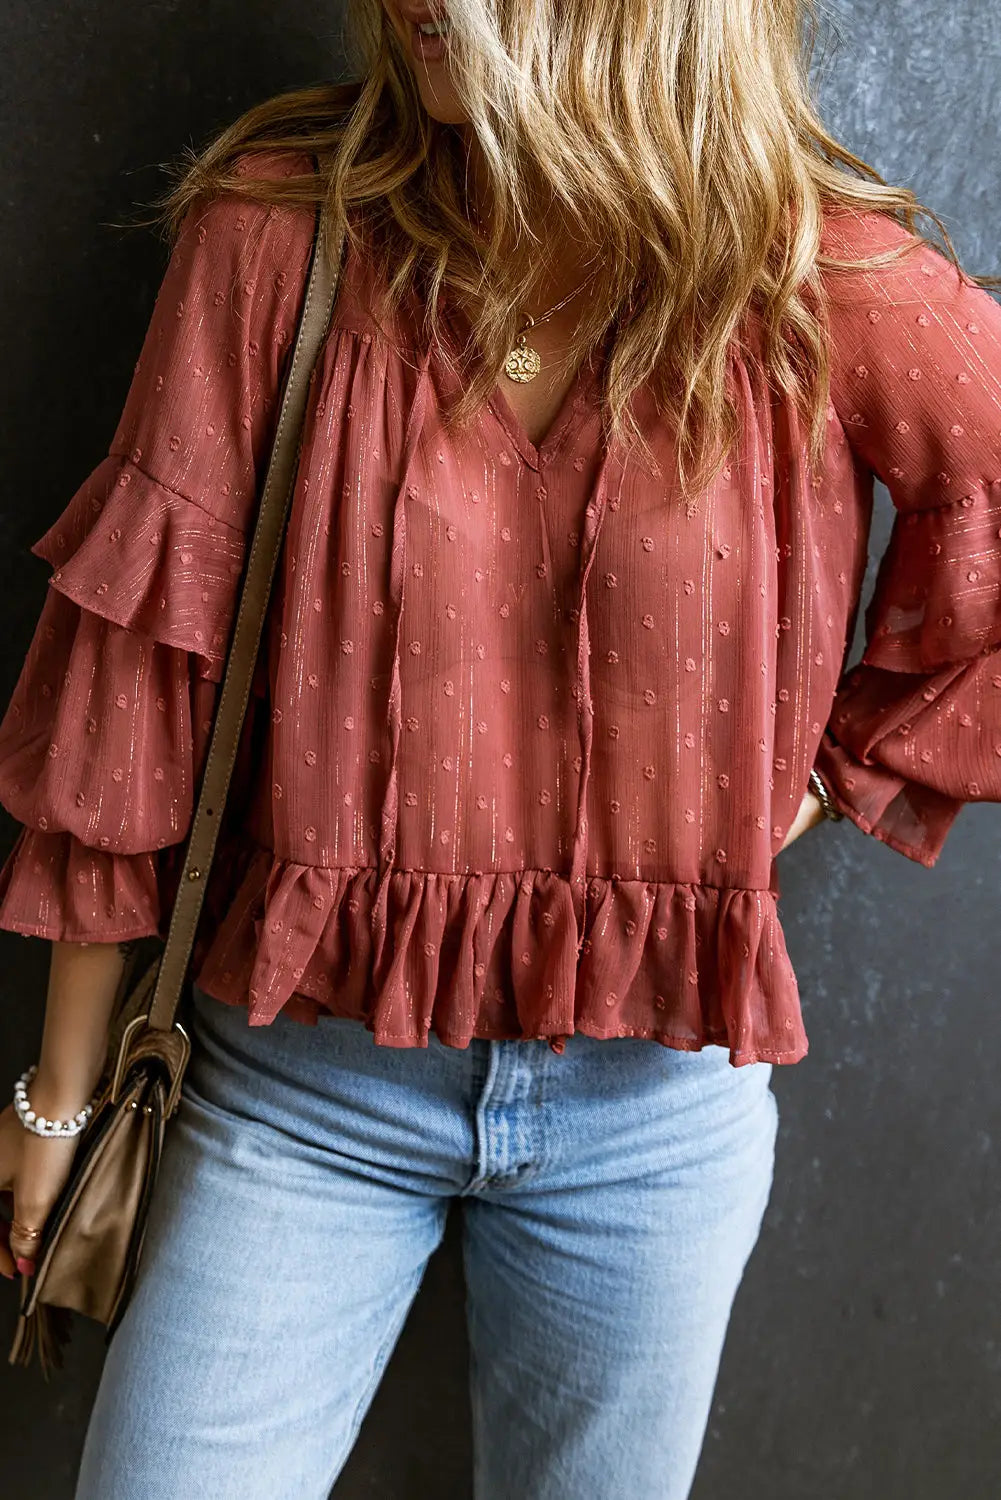 Red swiss dot lace up v neck ruffled blouse - tops